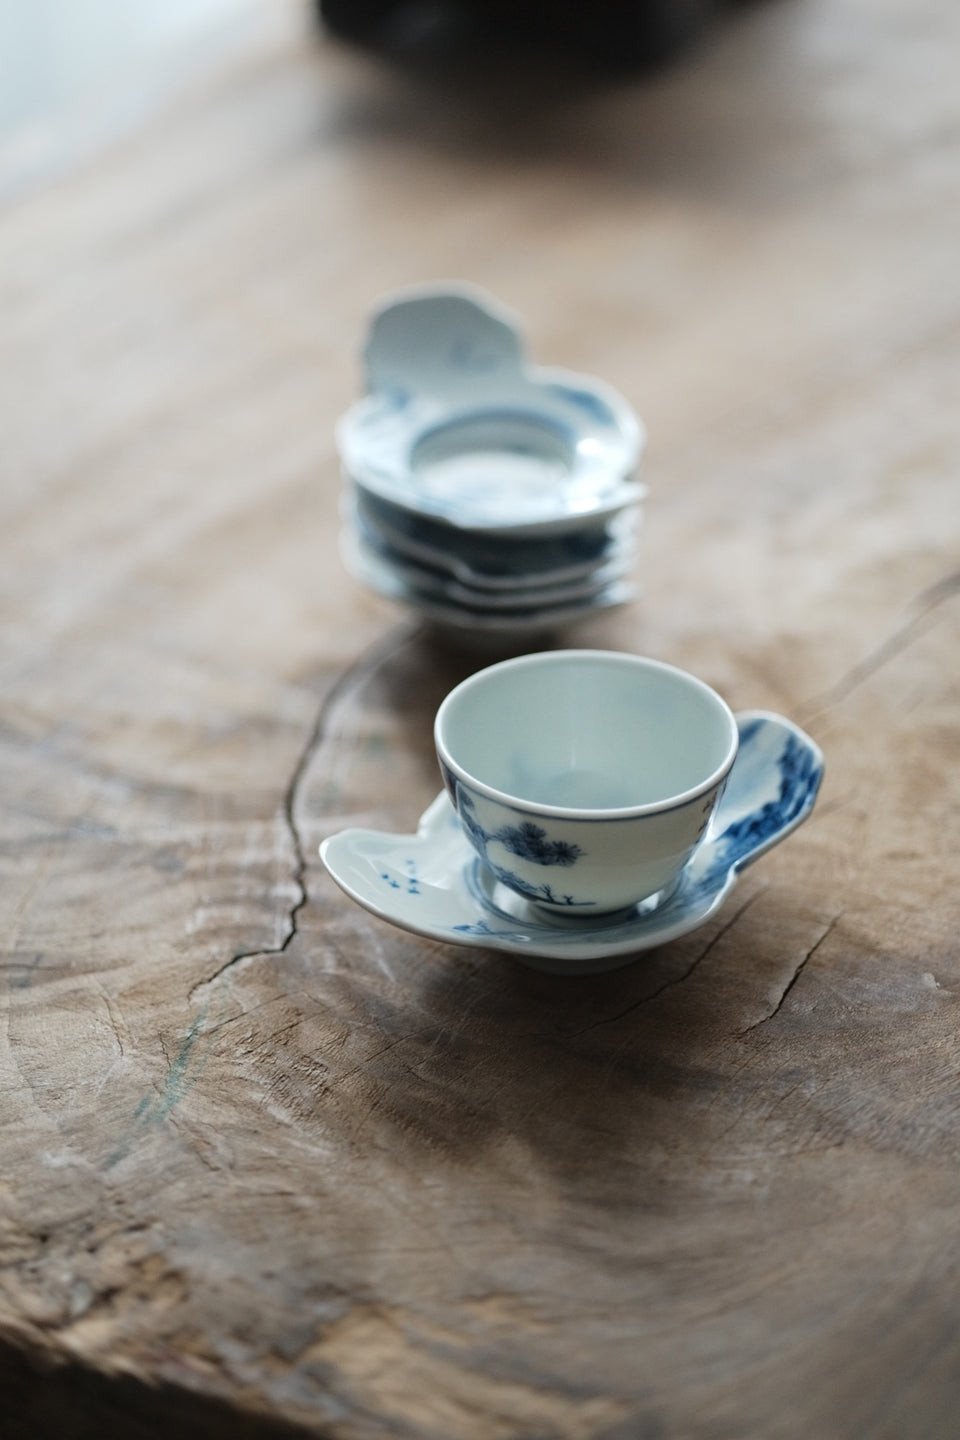 Fishing Man Qinghua Hand-made & Painted Teacup Saucers